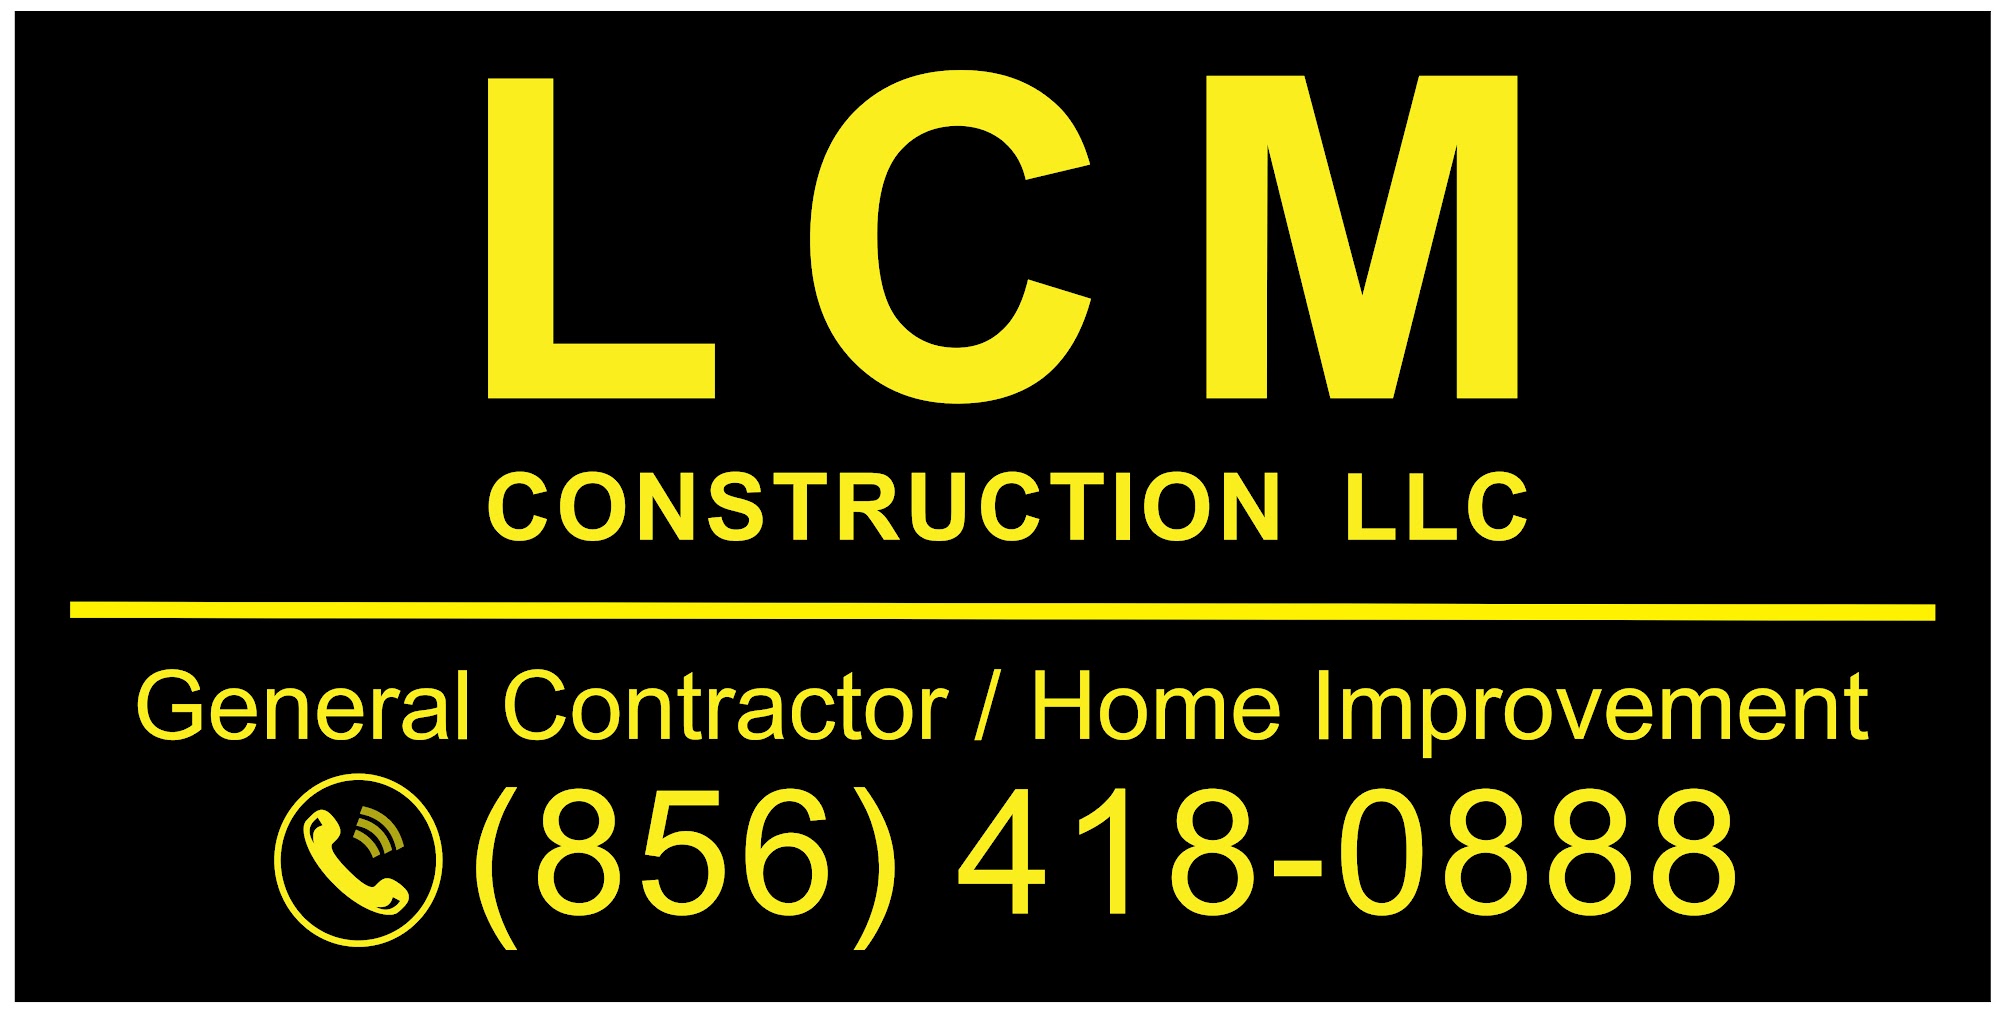 LCM Construction LLC 630 Bentley Ave, Beverly New Jersey 08010